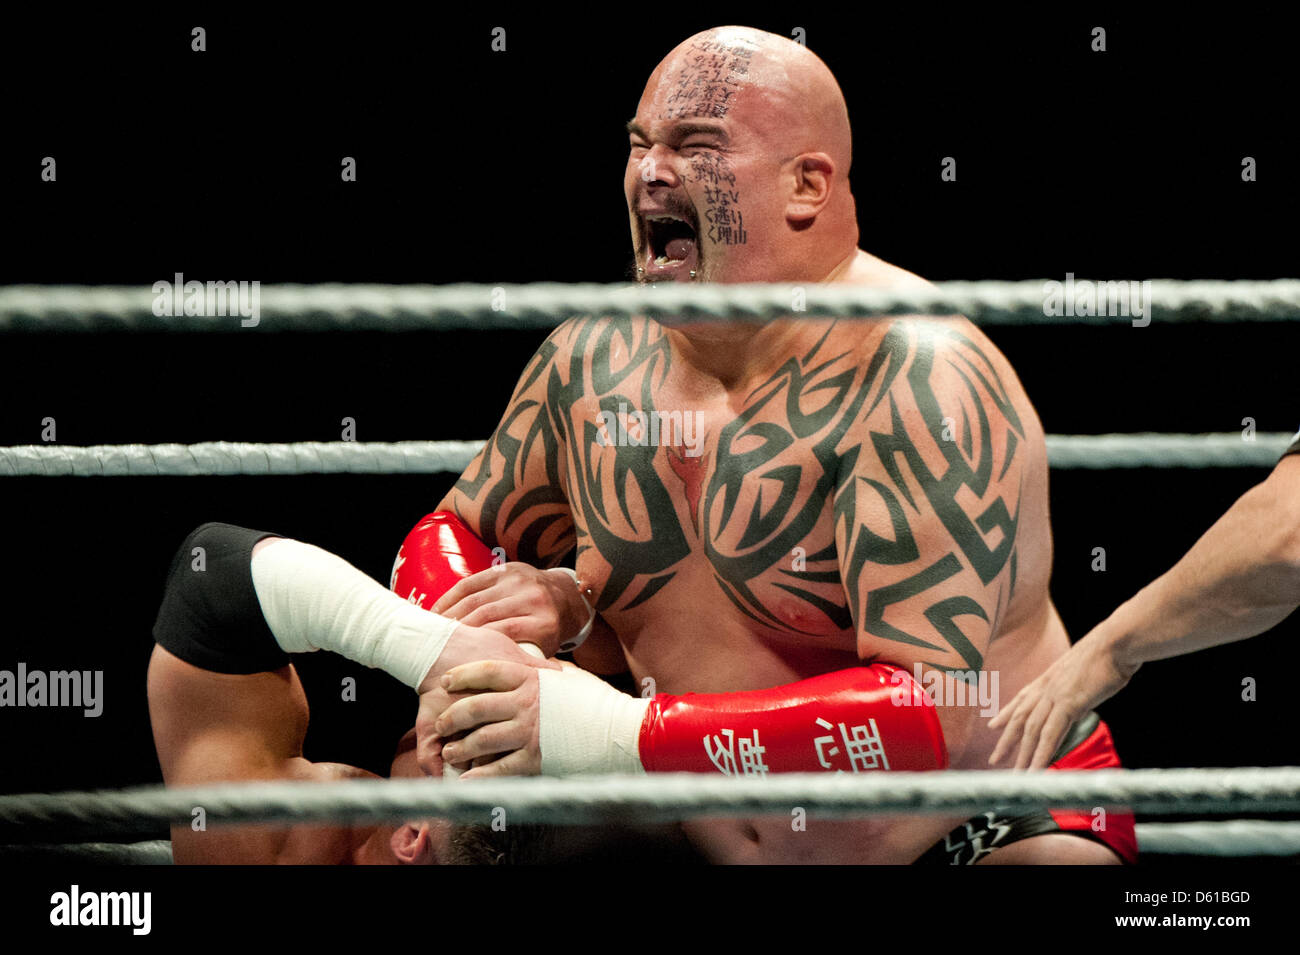 US-wrestler Lord Tensai fights in the wrestling ring during the RAW WrestleMania Revenge Tour at the o2 World canue in Berlin, Germany, 14 April 2012. The WWE (World Wrestling Entertainment) celebrates its 20th German anniversary this April. The first show in Germany was staged in Kiel, Germany, in April 1992. Photo: Sebastian Kahnert Stock Photo